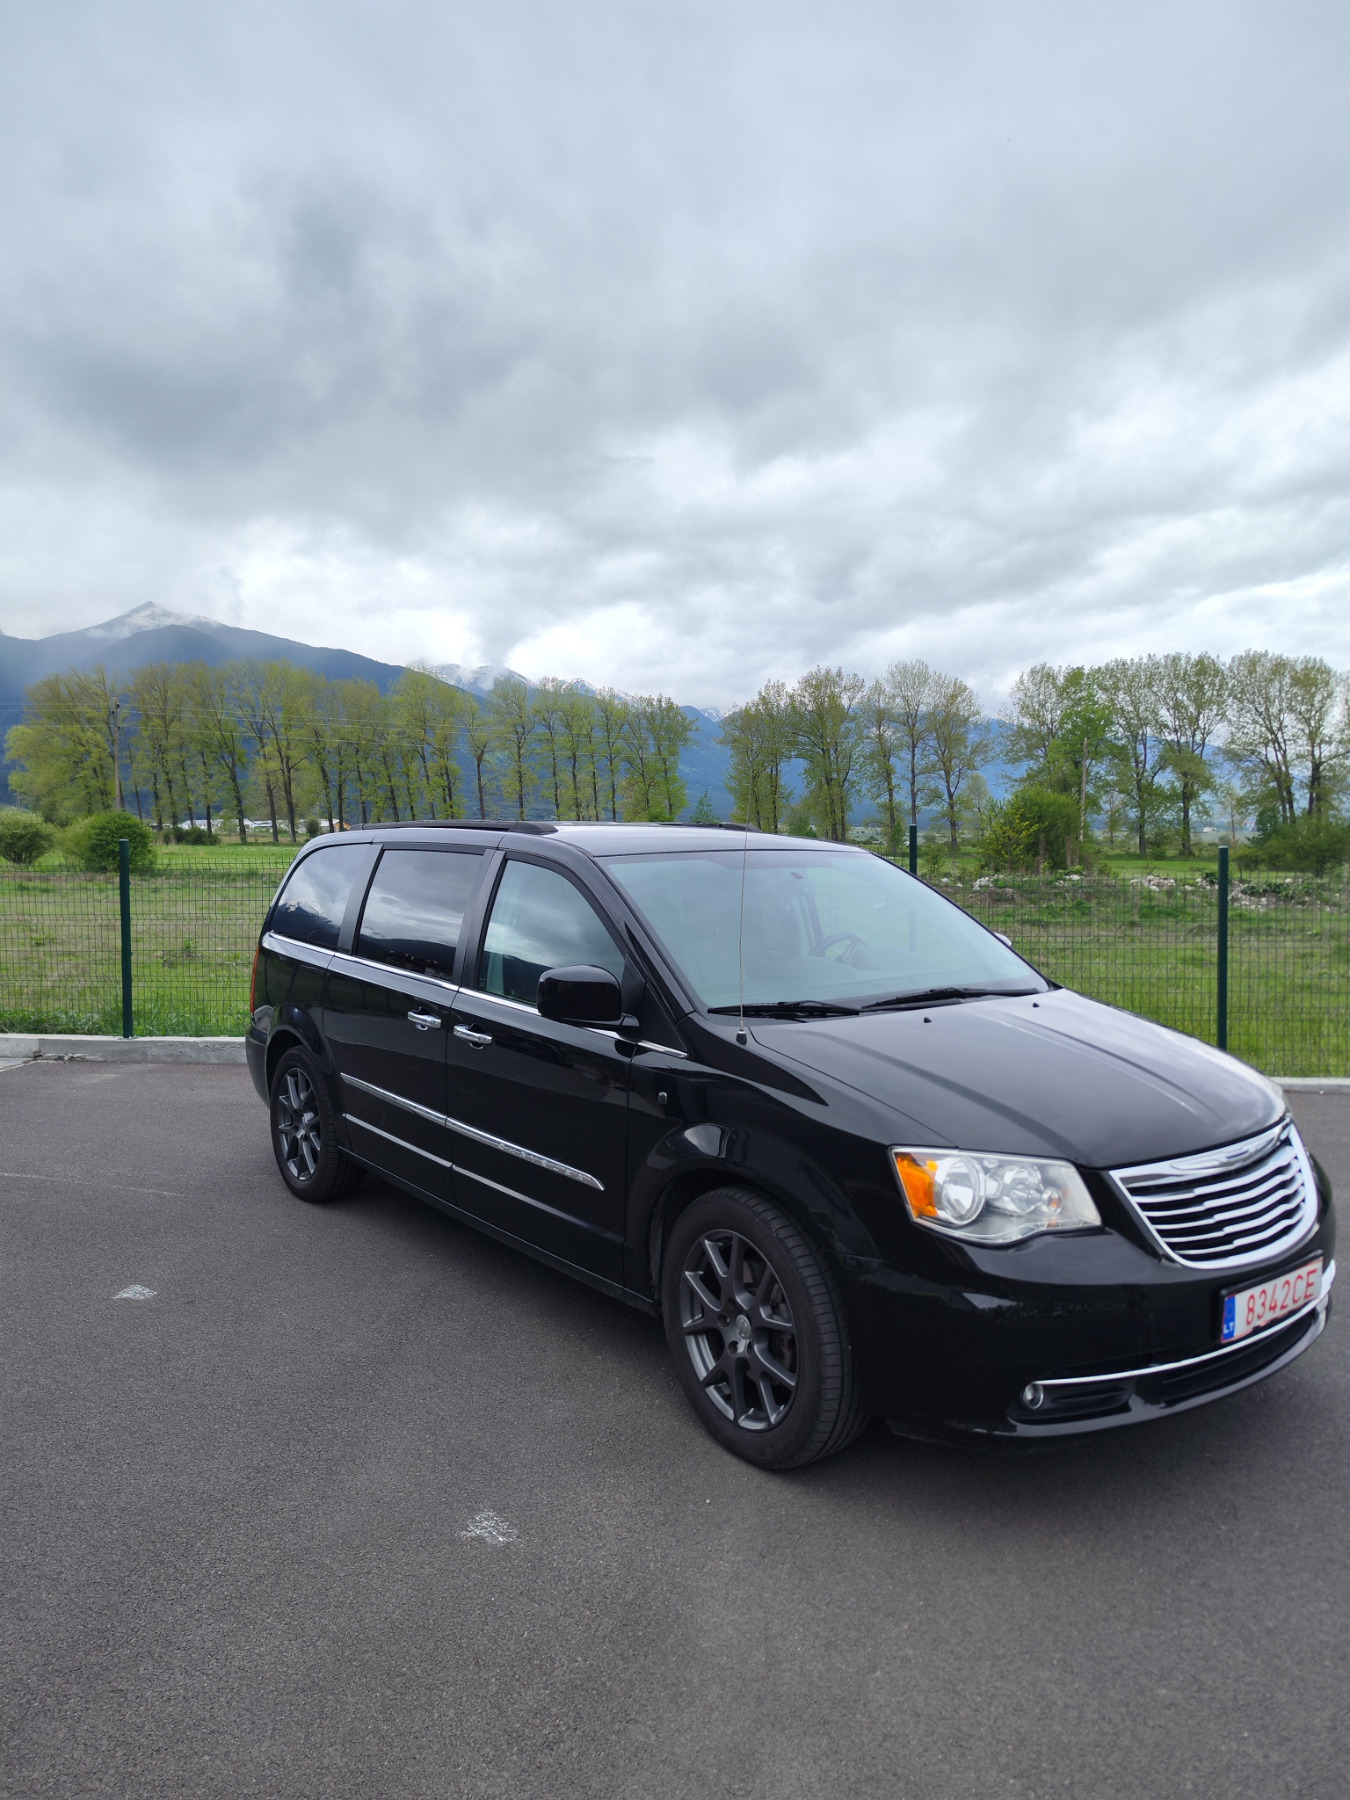 Chrysler Town and Country 3.6 LPG - изображение 1